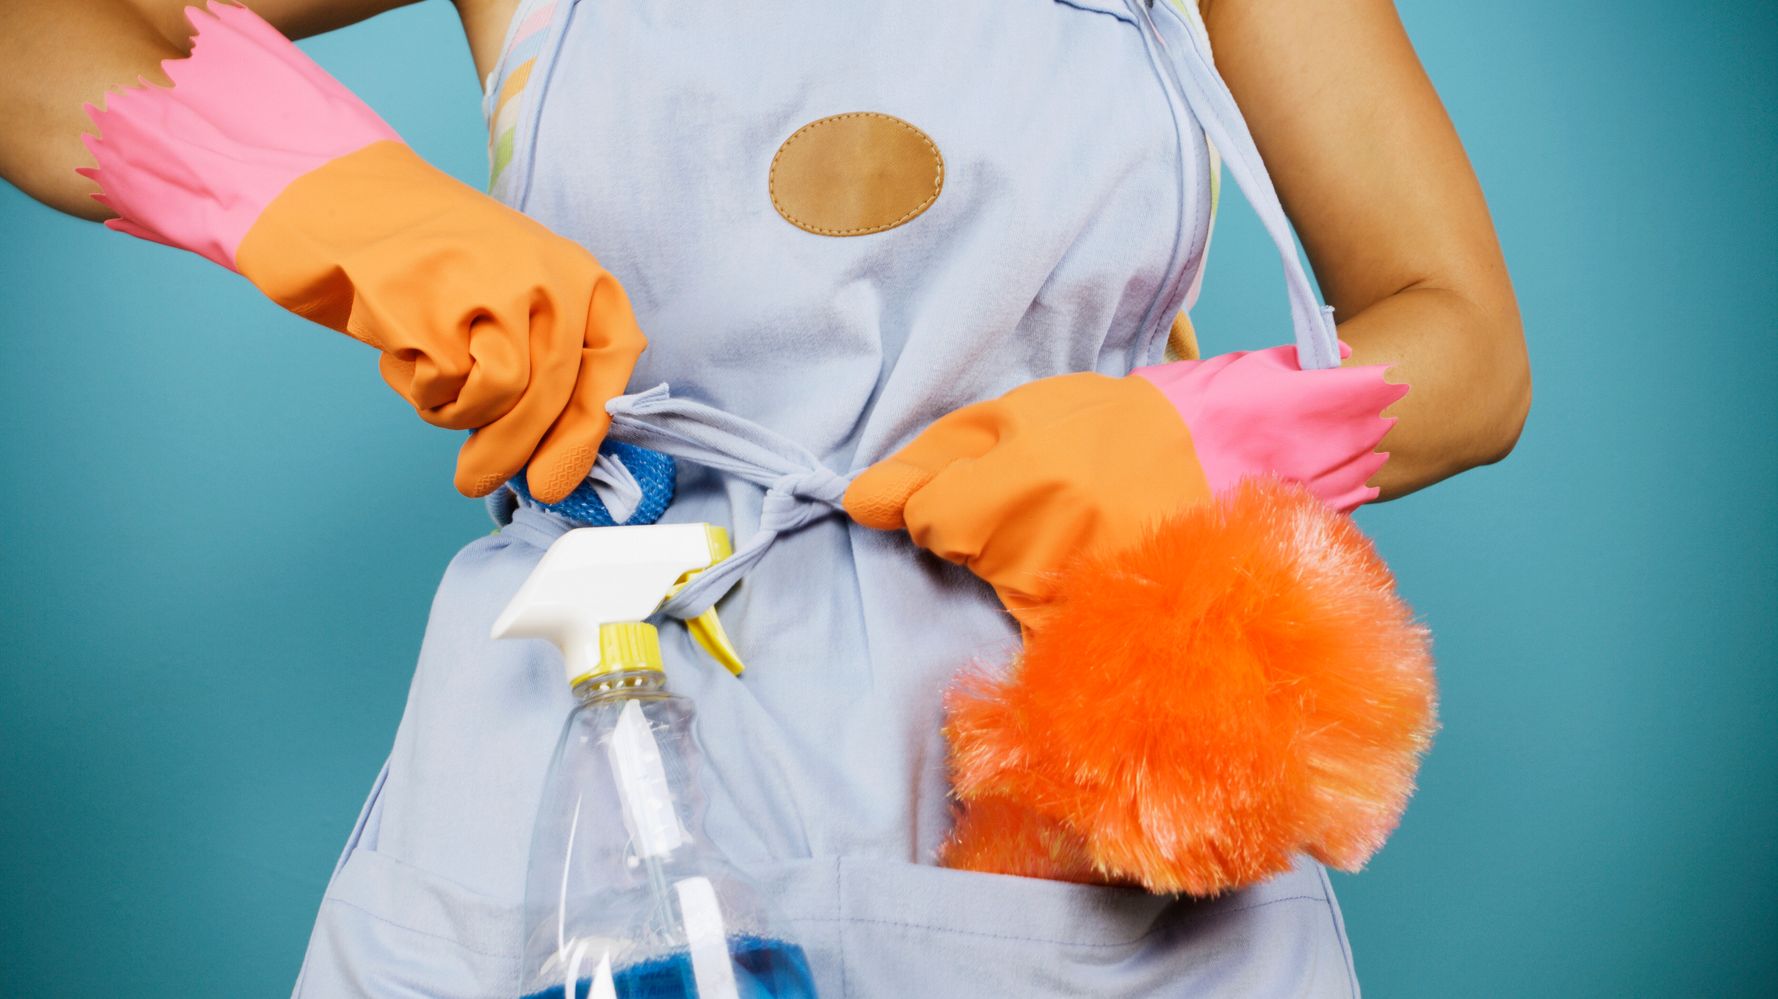 Cleaning Your Home With a Clean Bill of Health